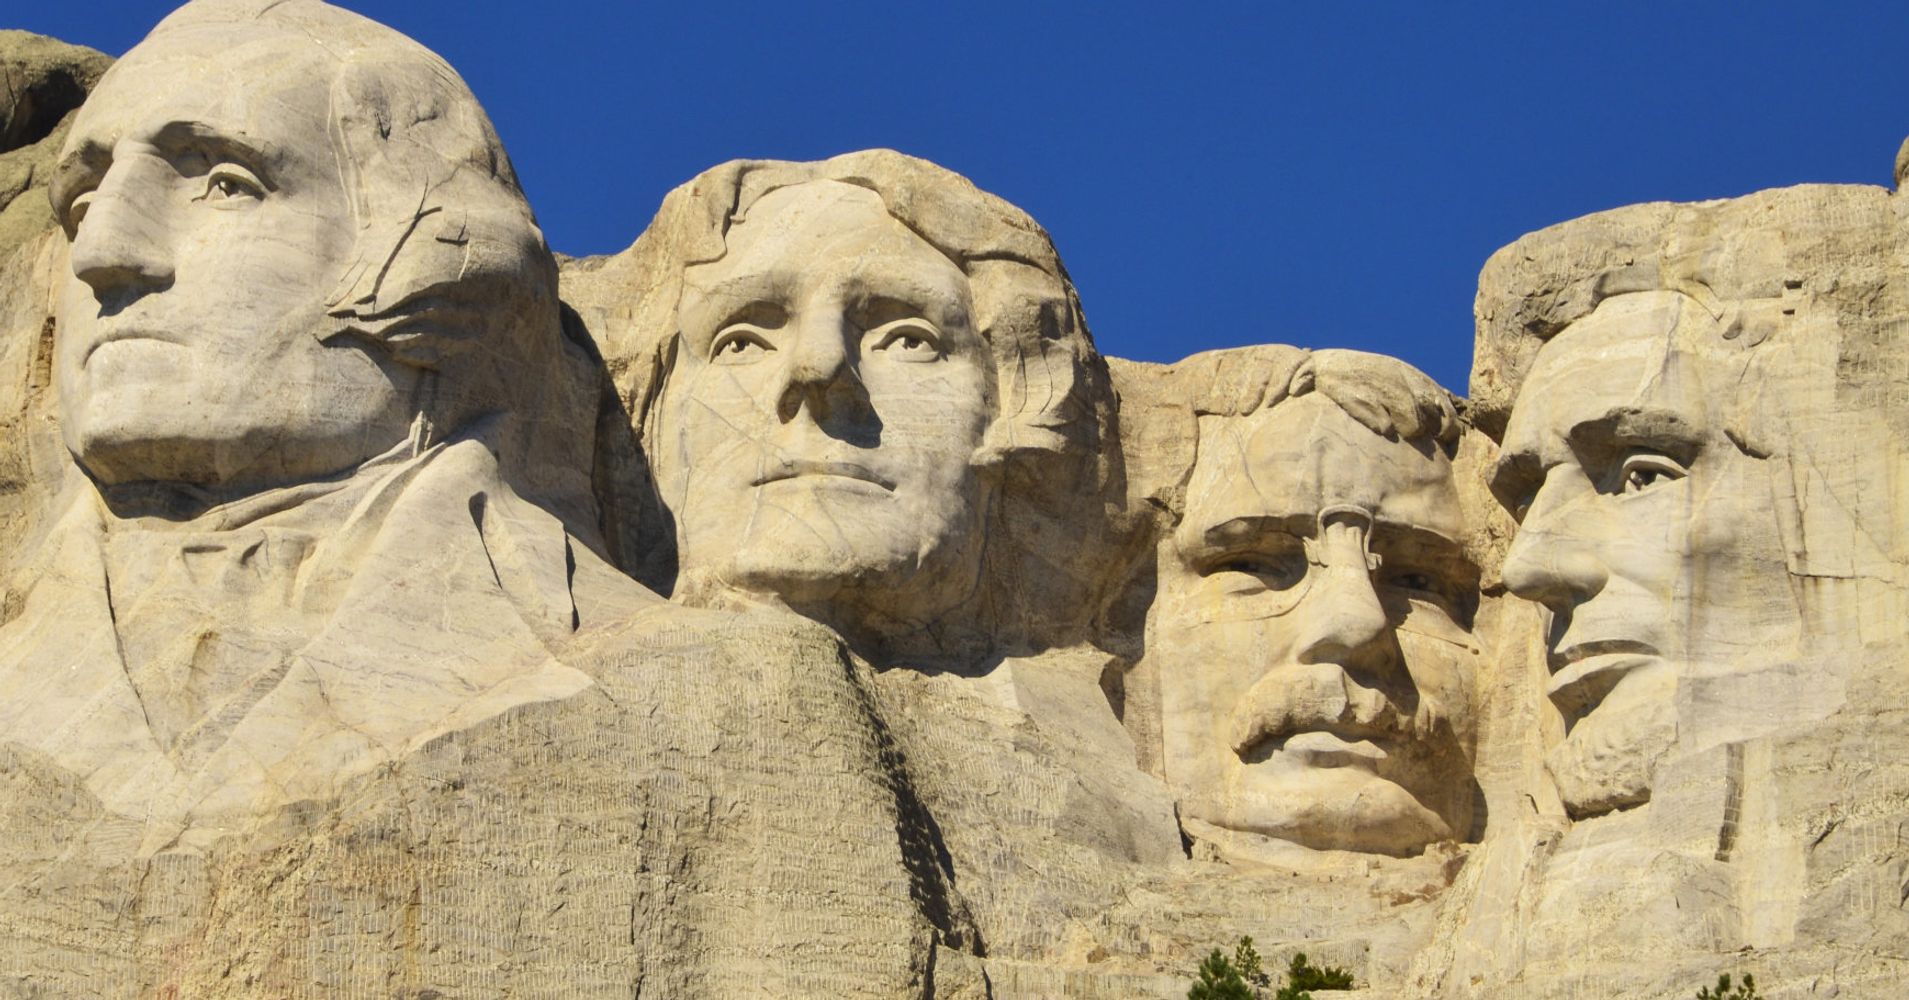 Donald Trump's Mount Rushmore 'Joke' Goes Down As You'd Expect | HuffPost